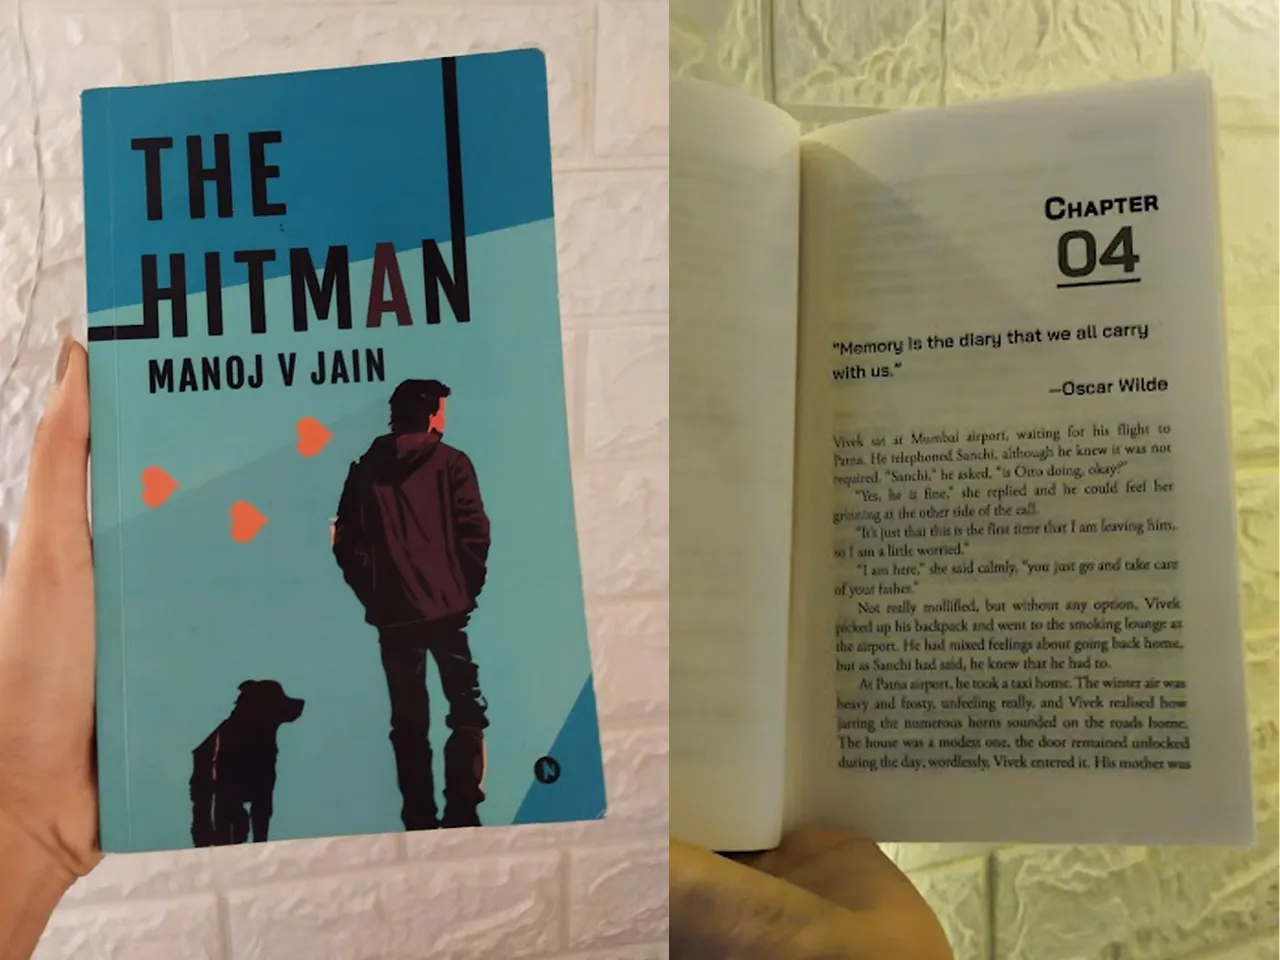 the hitman book review 